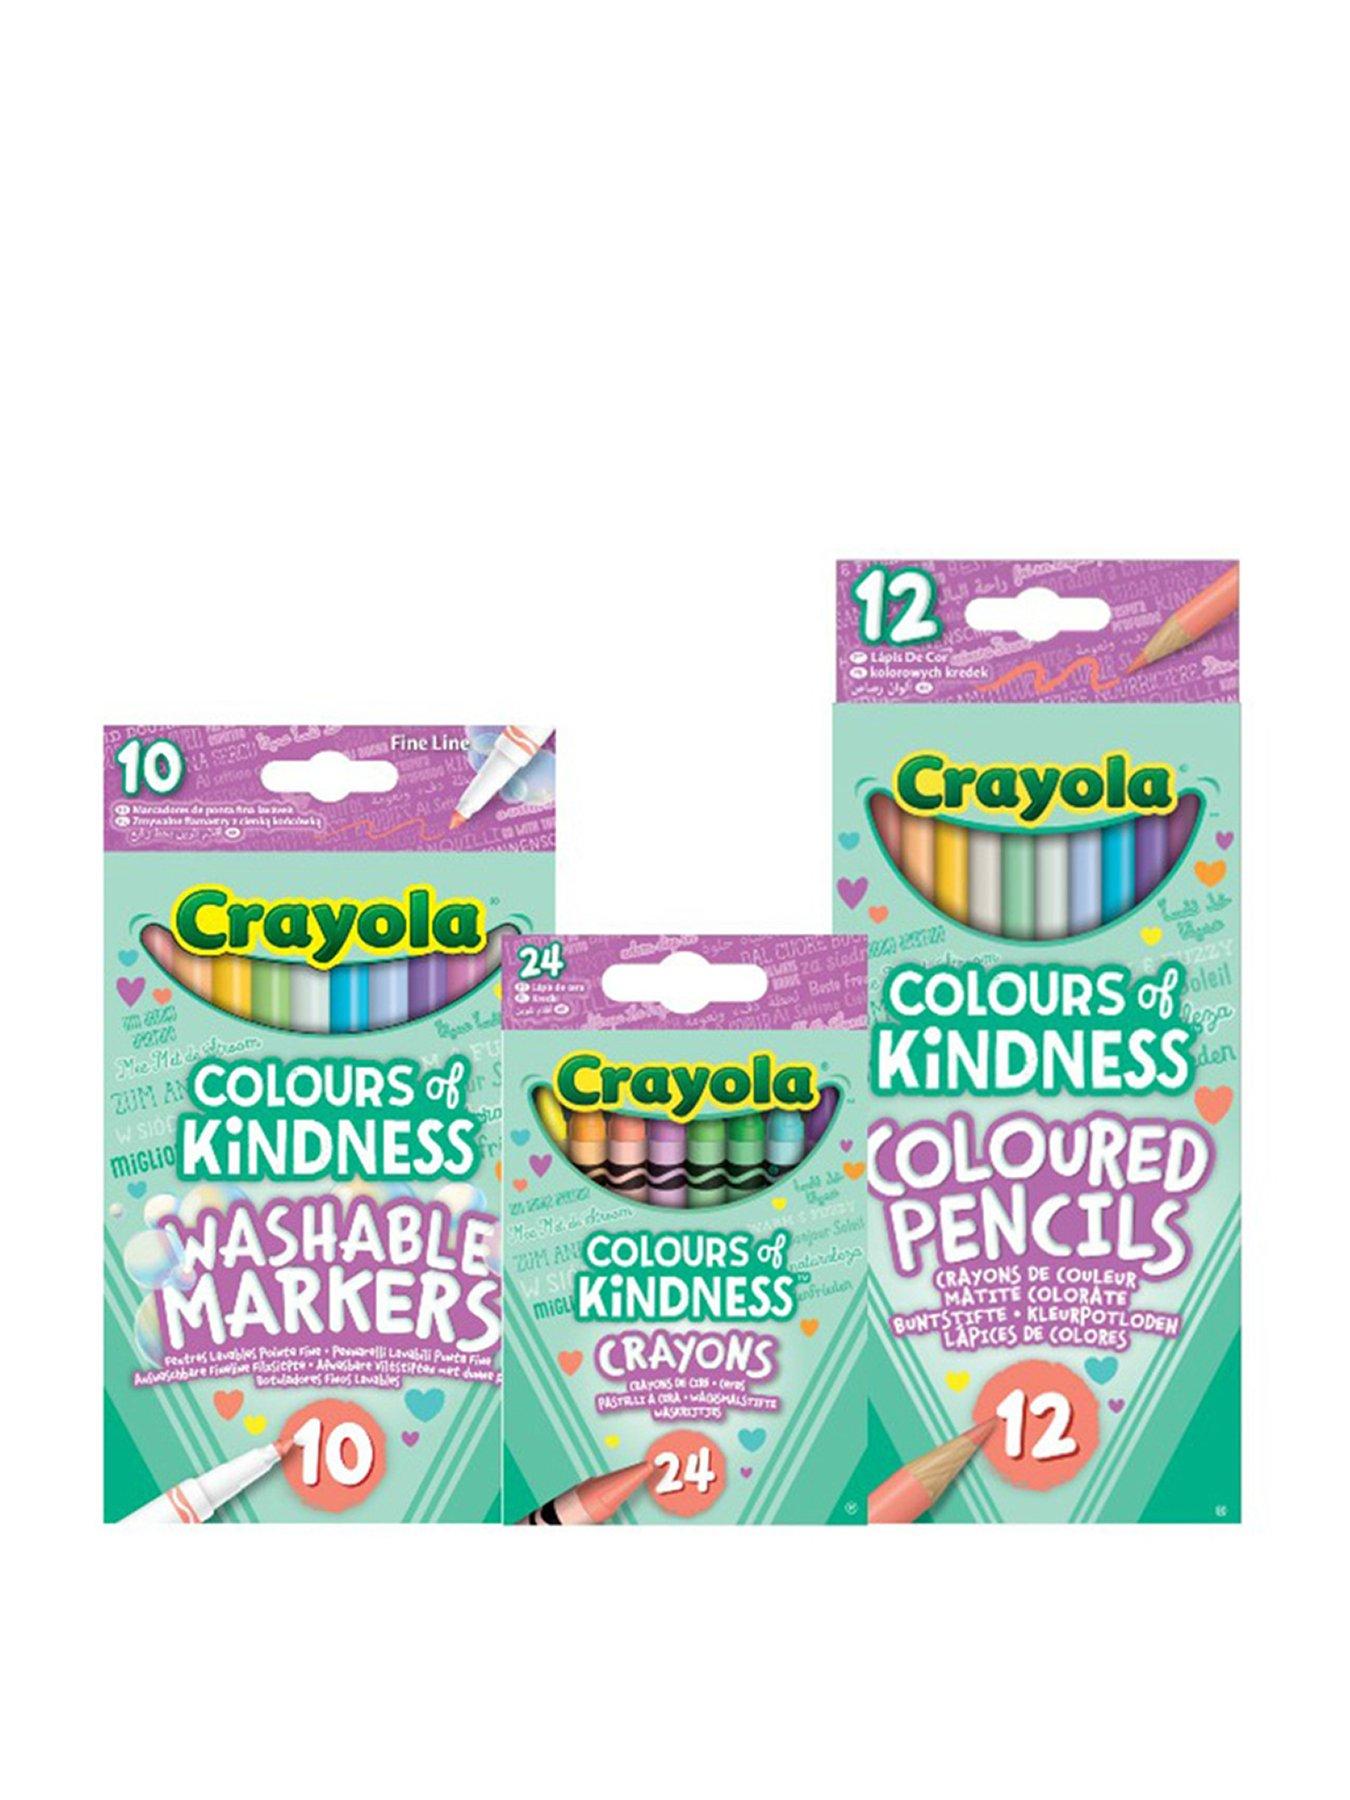 Lowest Price: Crayola Super Tips Washable Markers, 80 Count Set, 43  Unique Colors with Doubles of Your Favorite 25 Colors & 12 Scented Shades